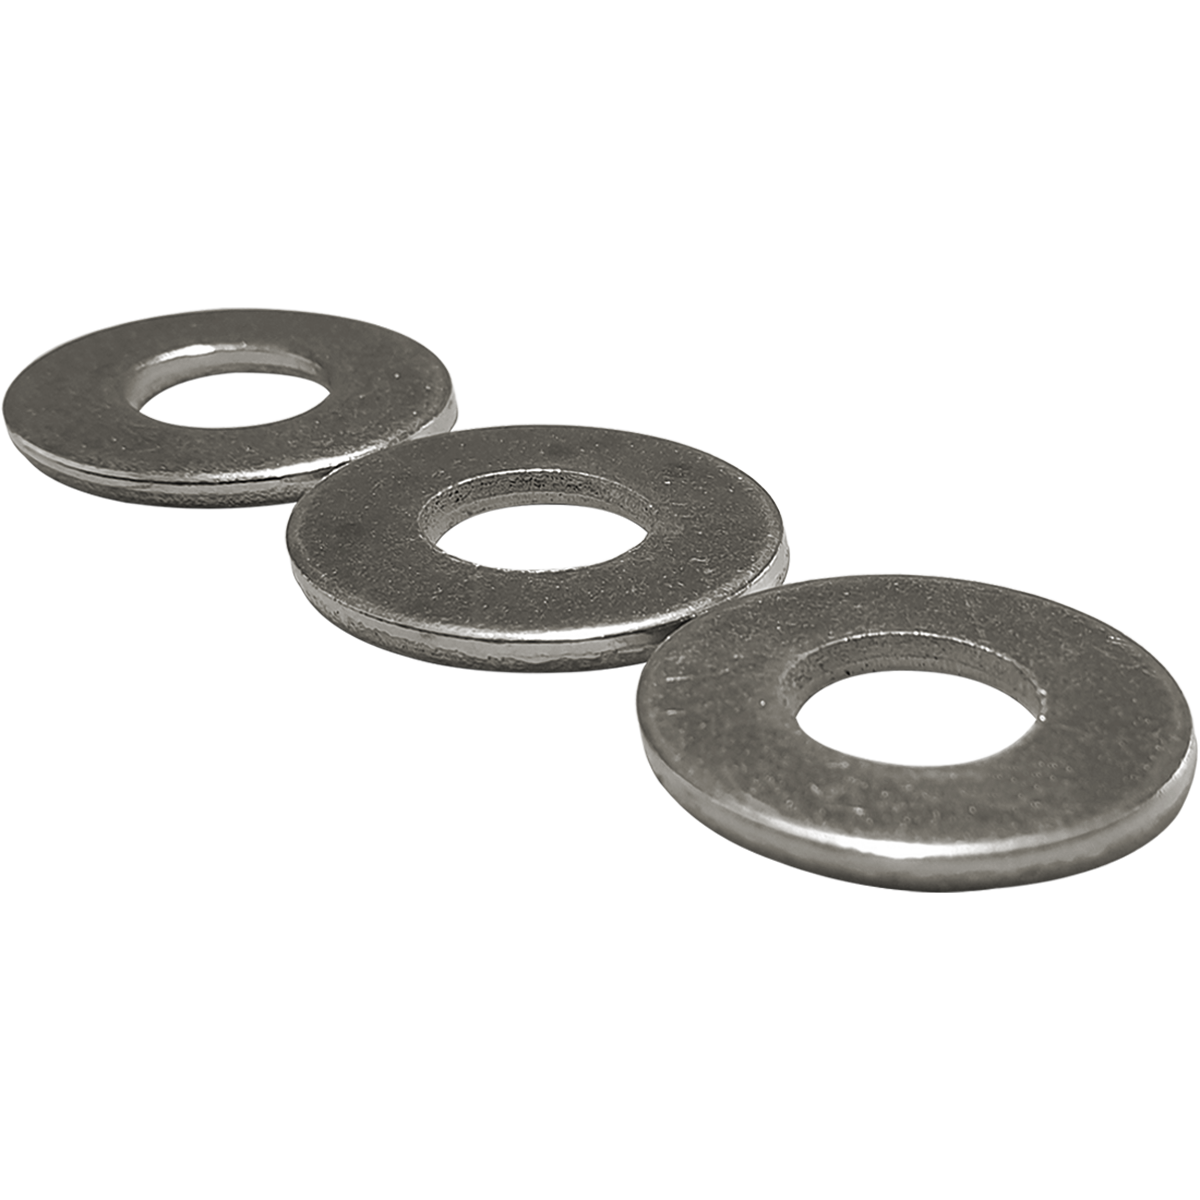 Form ‘C’ washers are available in various sizes and with competitive prices